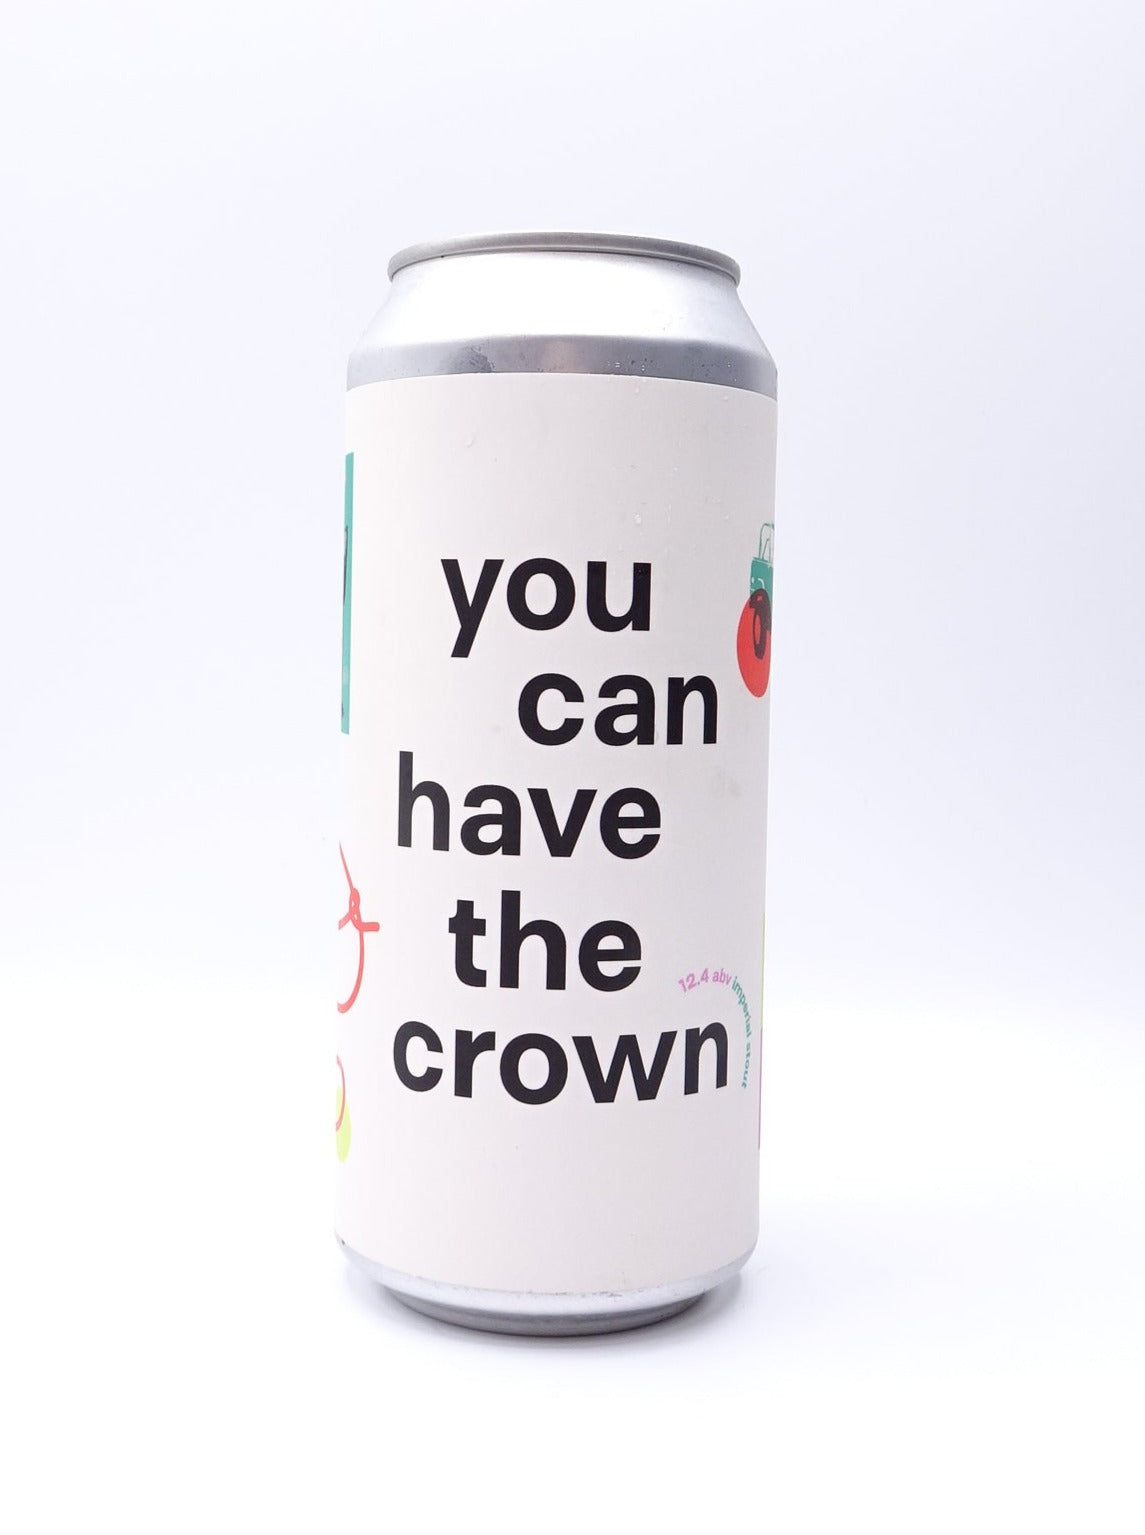 You Can Have the Crown／ユーキャン ハブ ザ クラウン